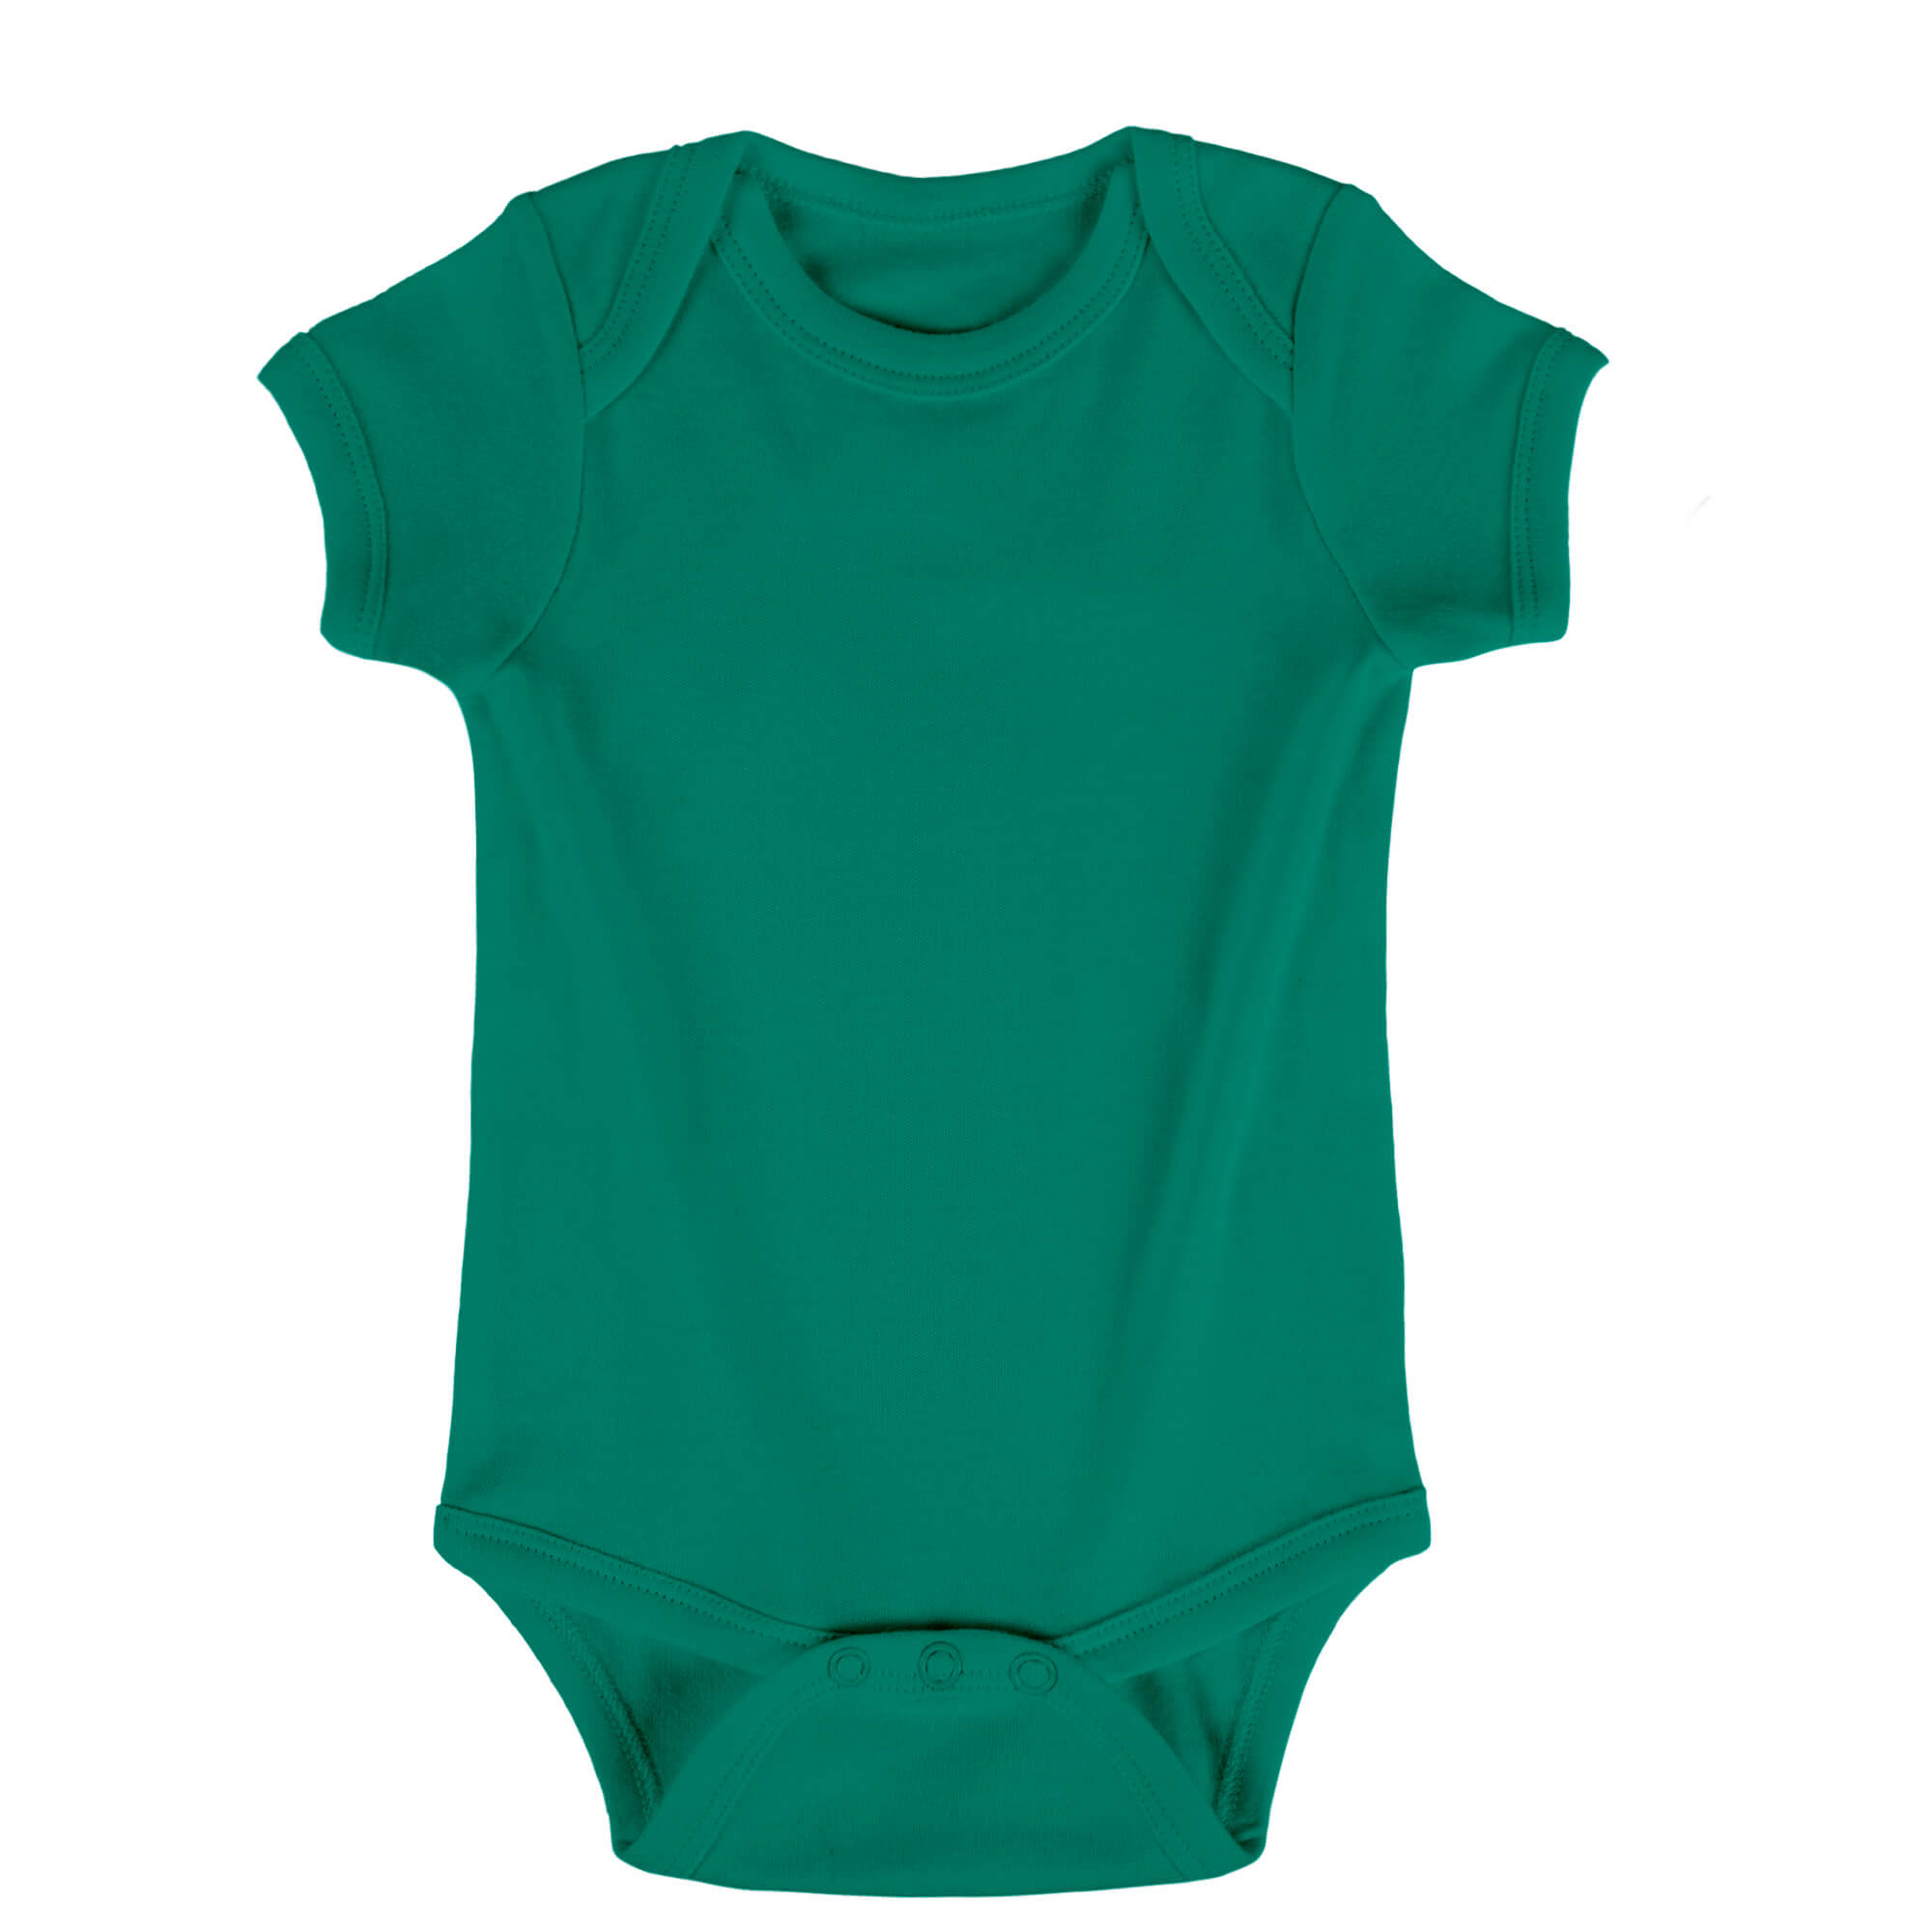 emerald green color number #37, onesie color selection, and color display.